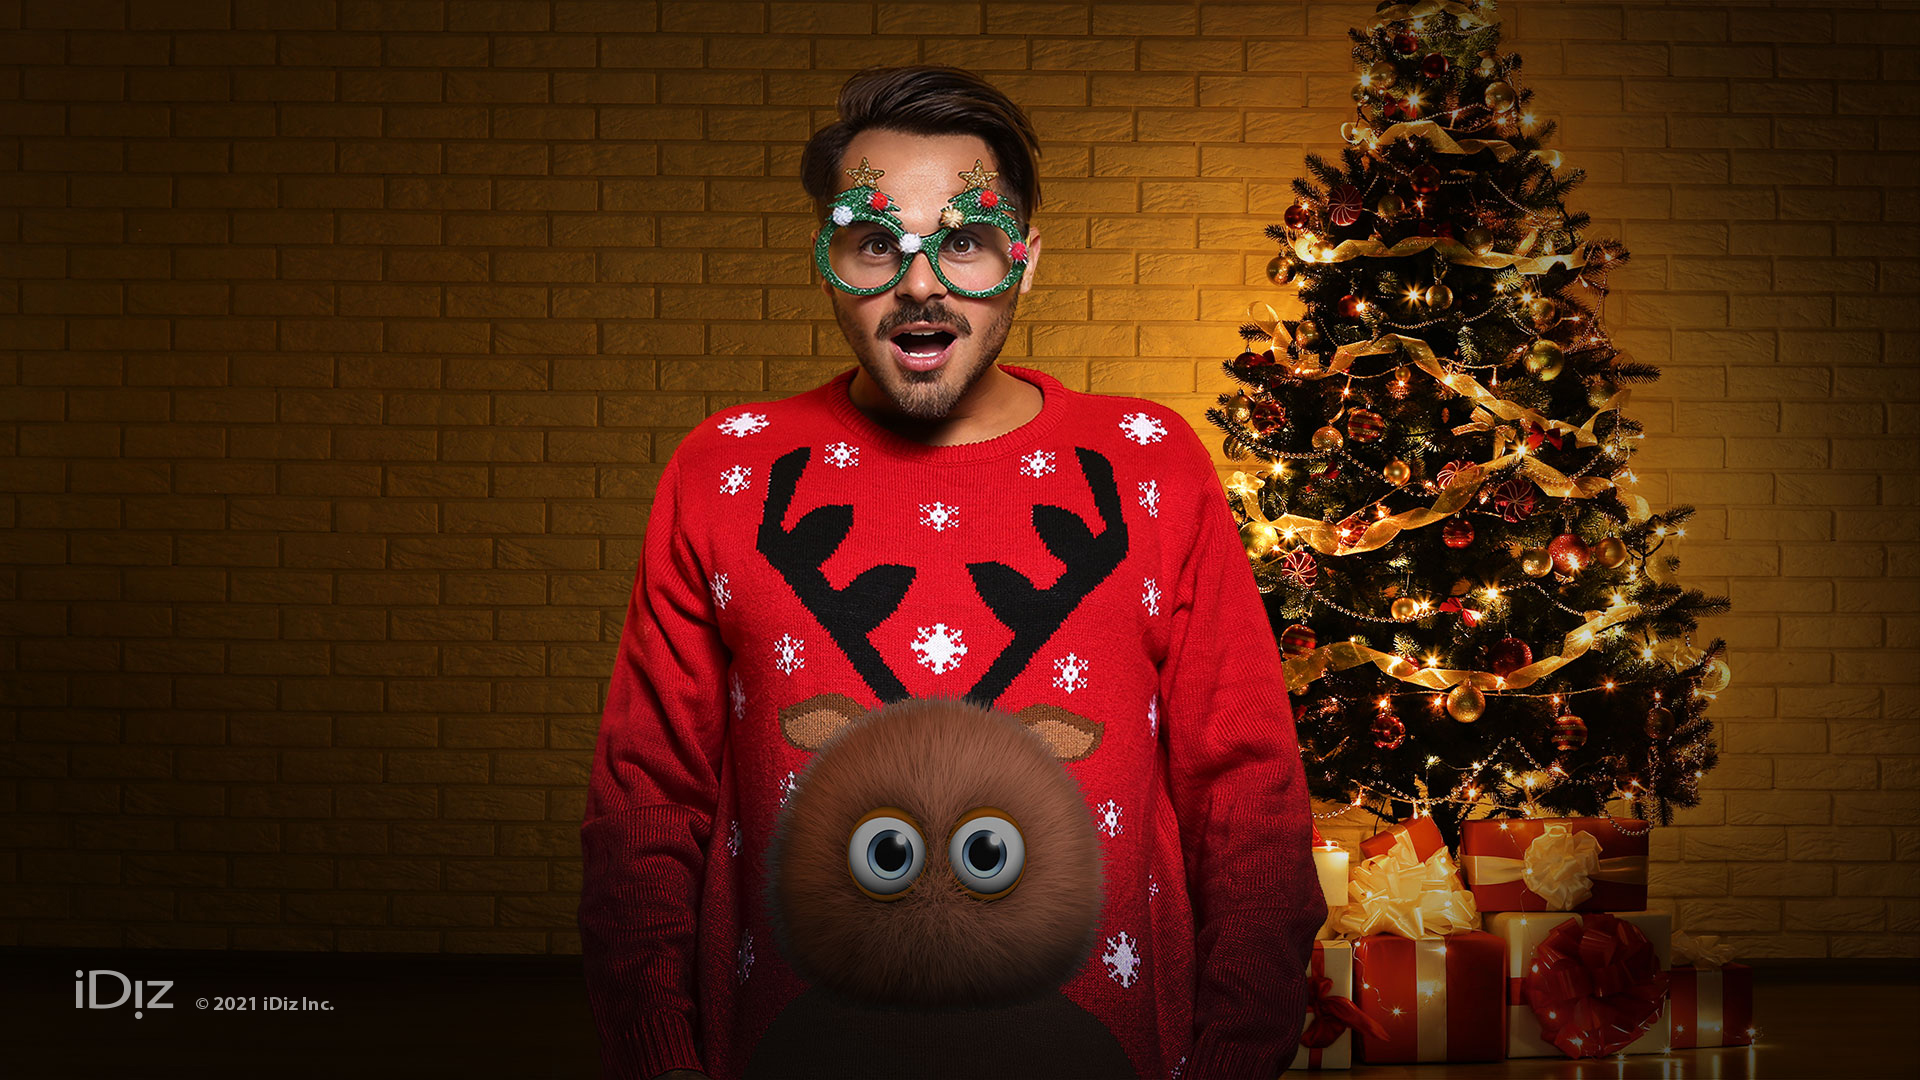 Monster holiday sweater
